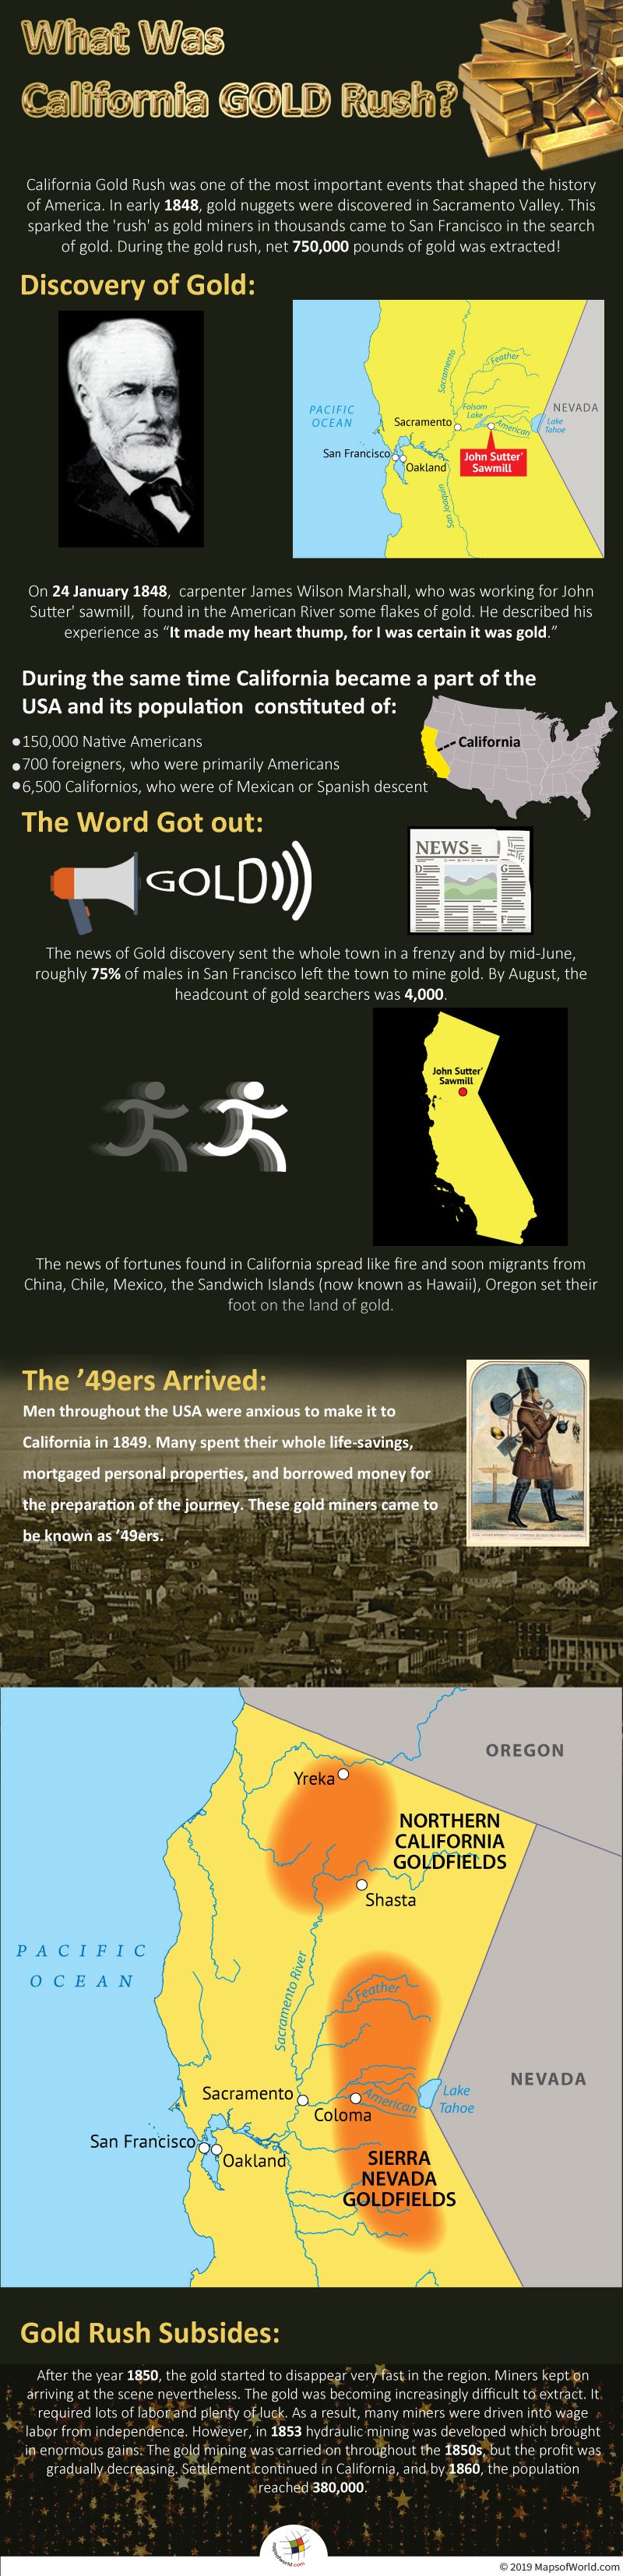 Infographic Giving Details About The Discovery of Gold